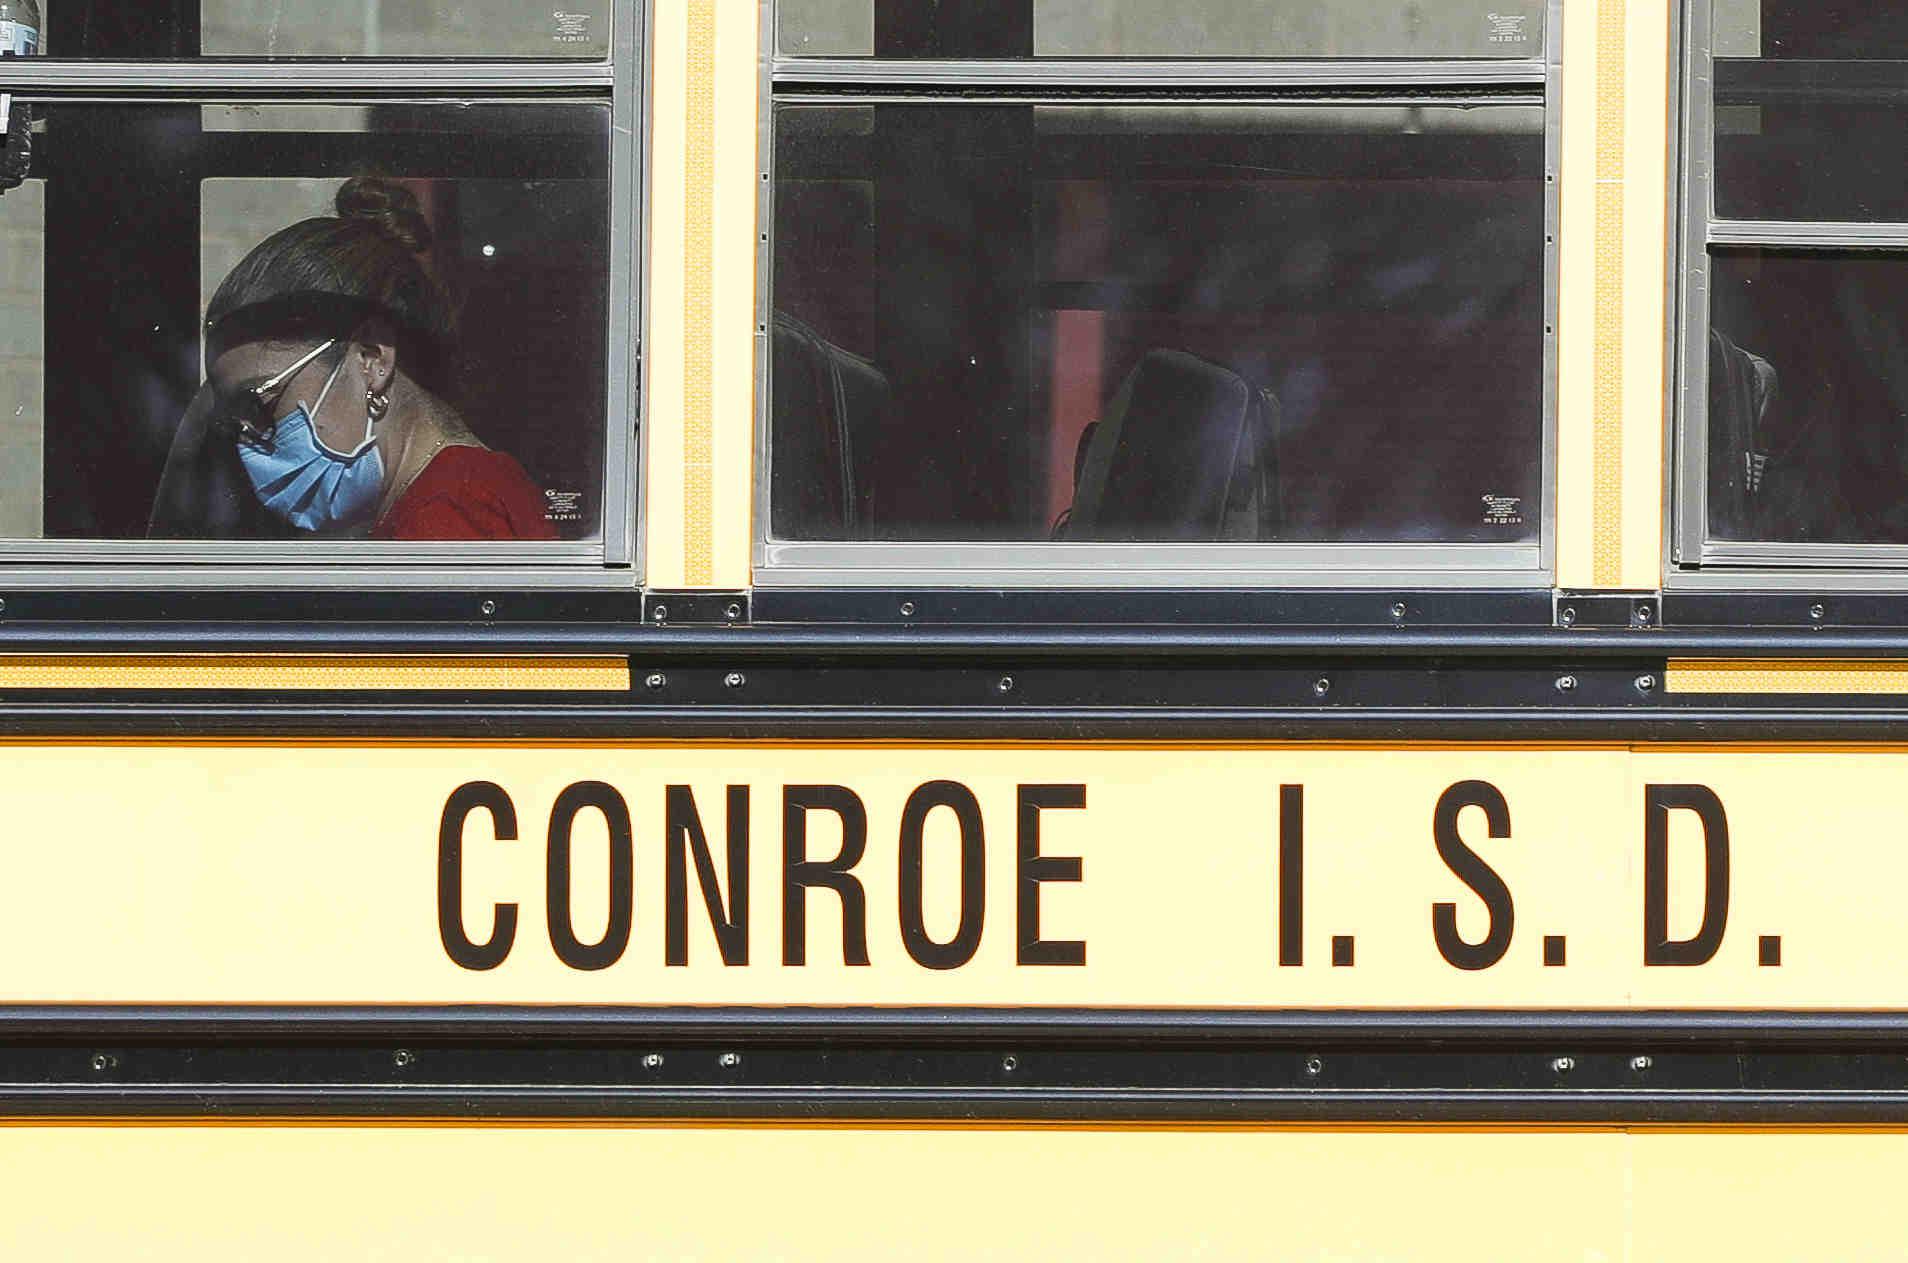 Klein Isd Calendar 2022 23 Conroe Isd Approves Its 2022-23 School Calendar With Aug. 10 Start Date